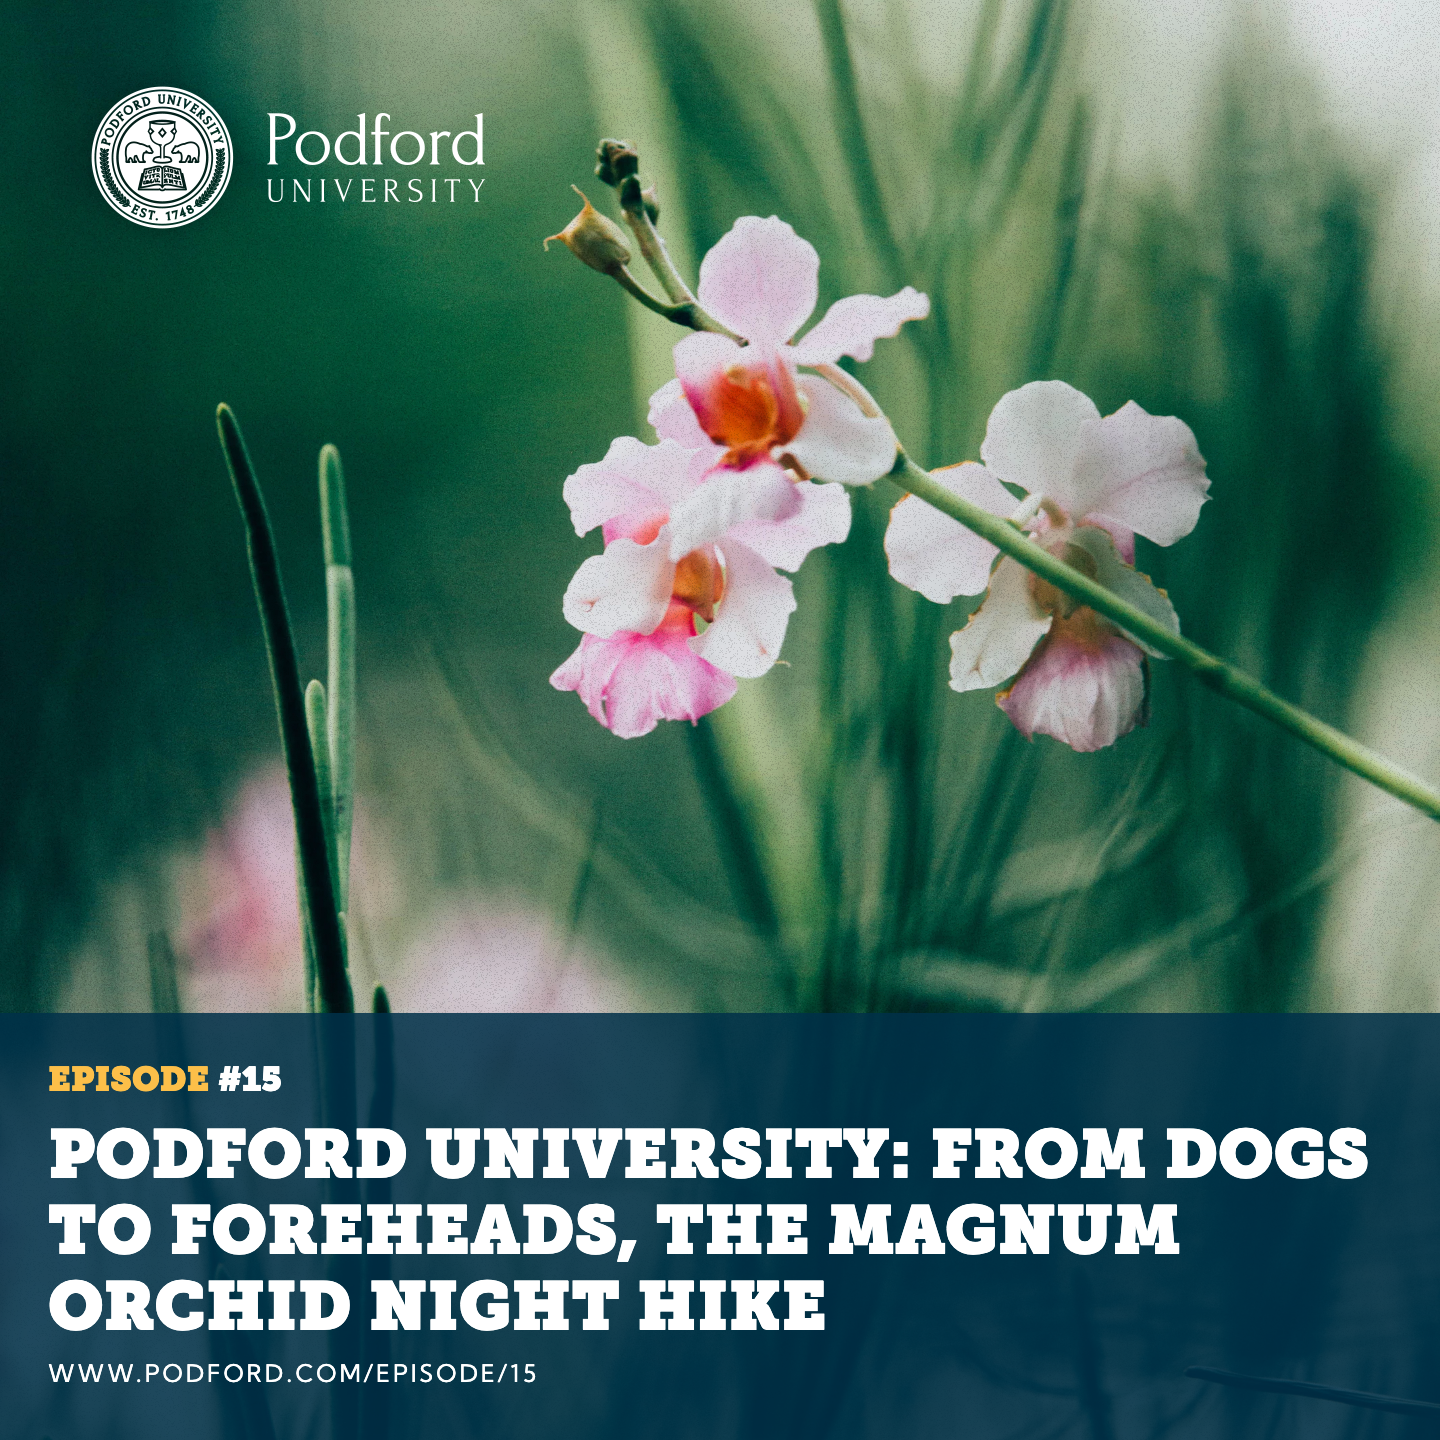 From Dogs to Foreheads, The Magnum Orchid Night Hike